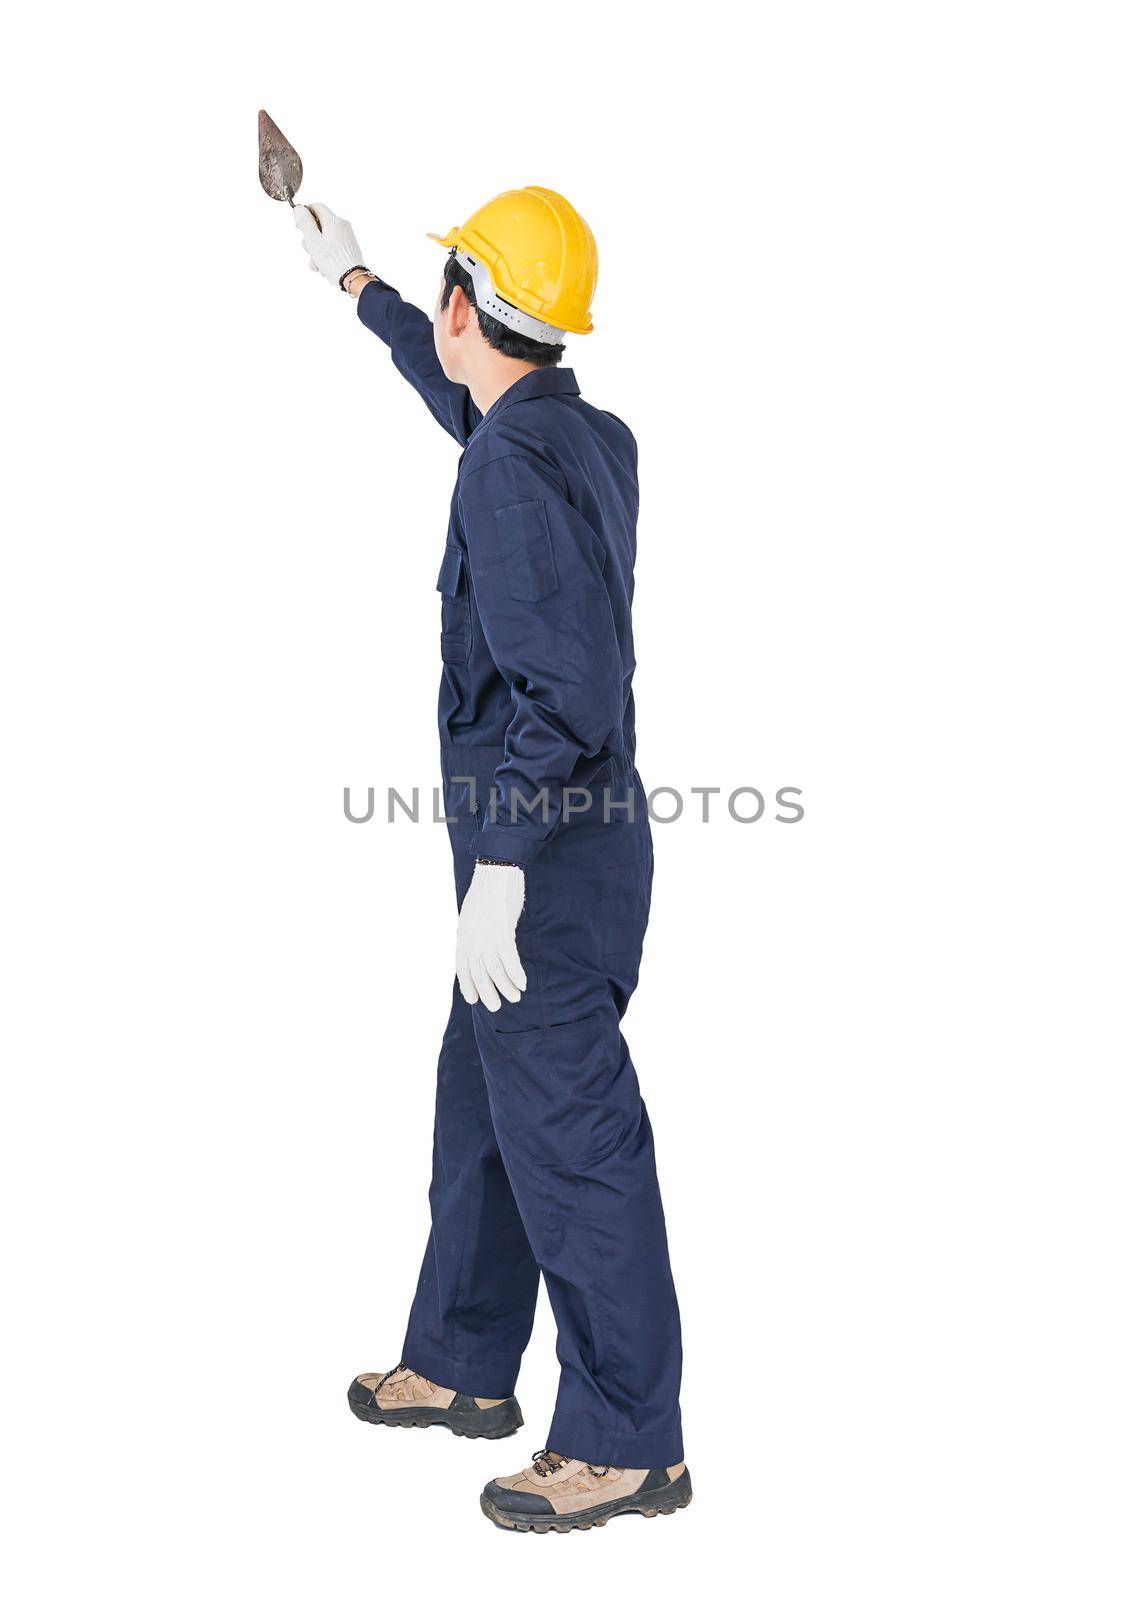 Workman with blue coveralls and hardhat in a uniform holding steel trowel by stoonn